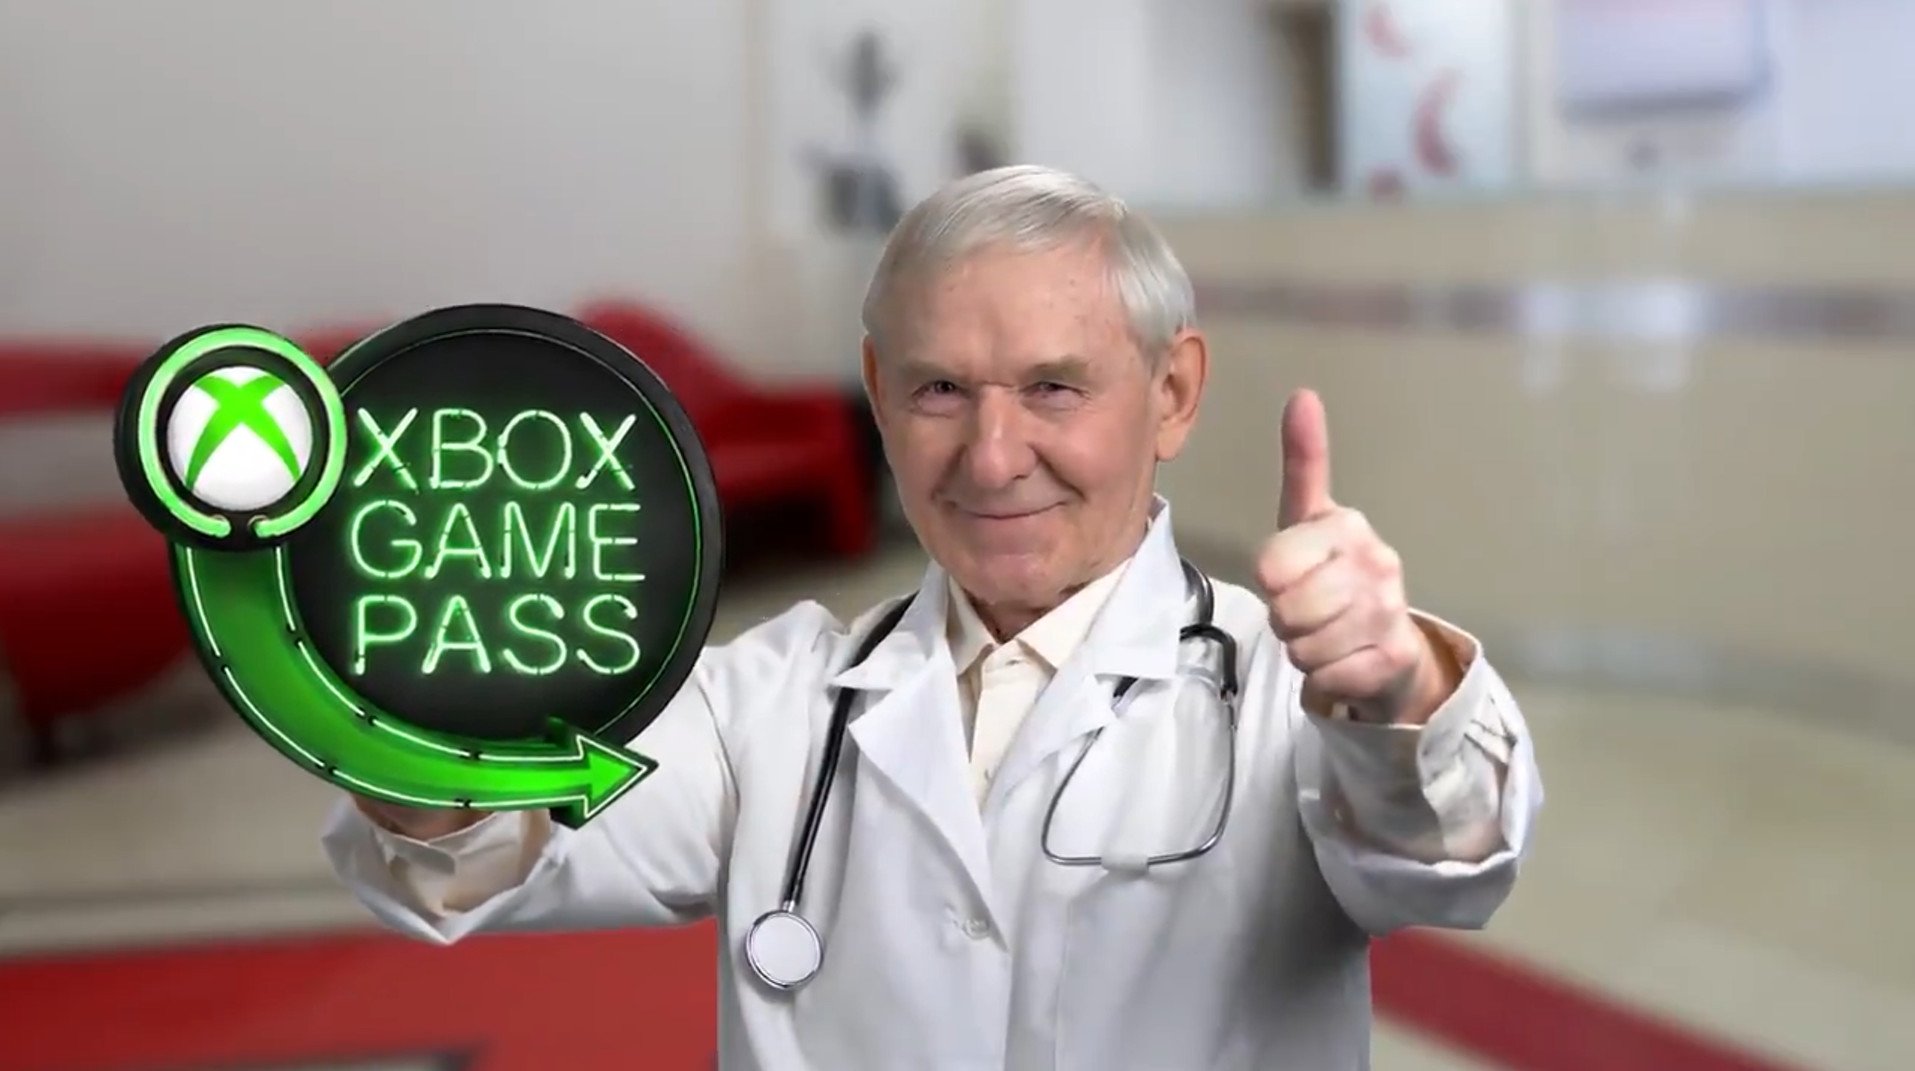 xbox-game-pass-ad-doctor.jpg